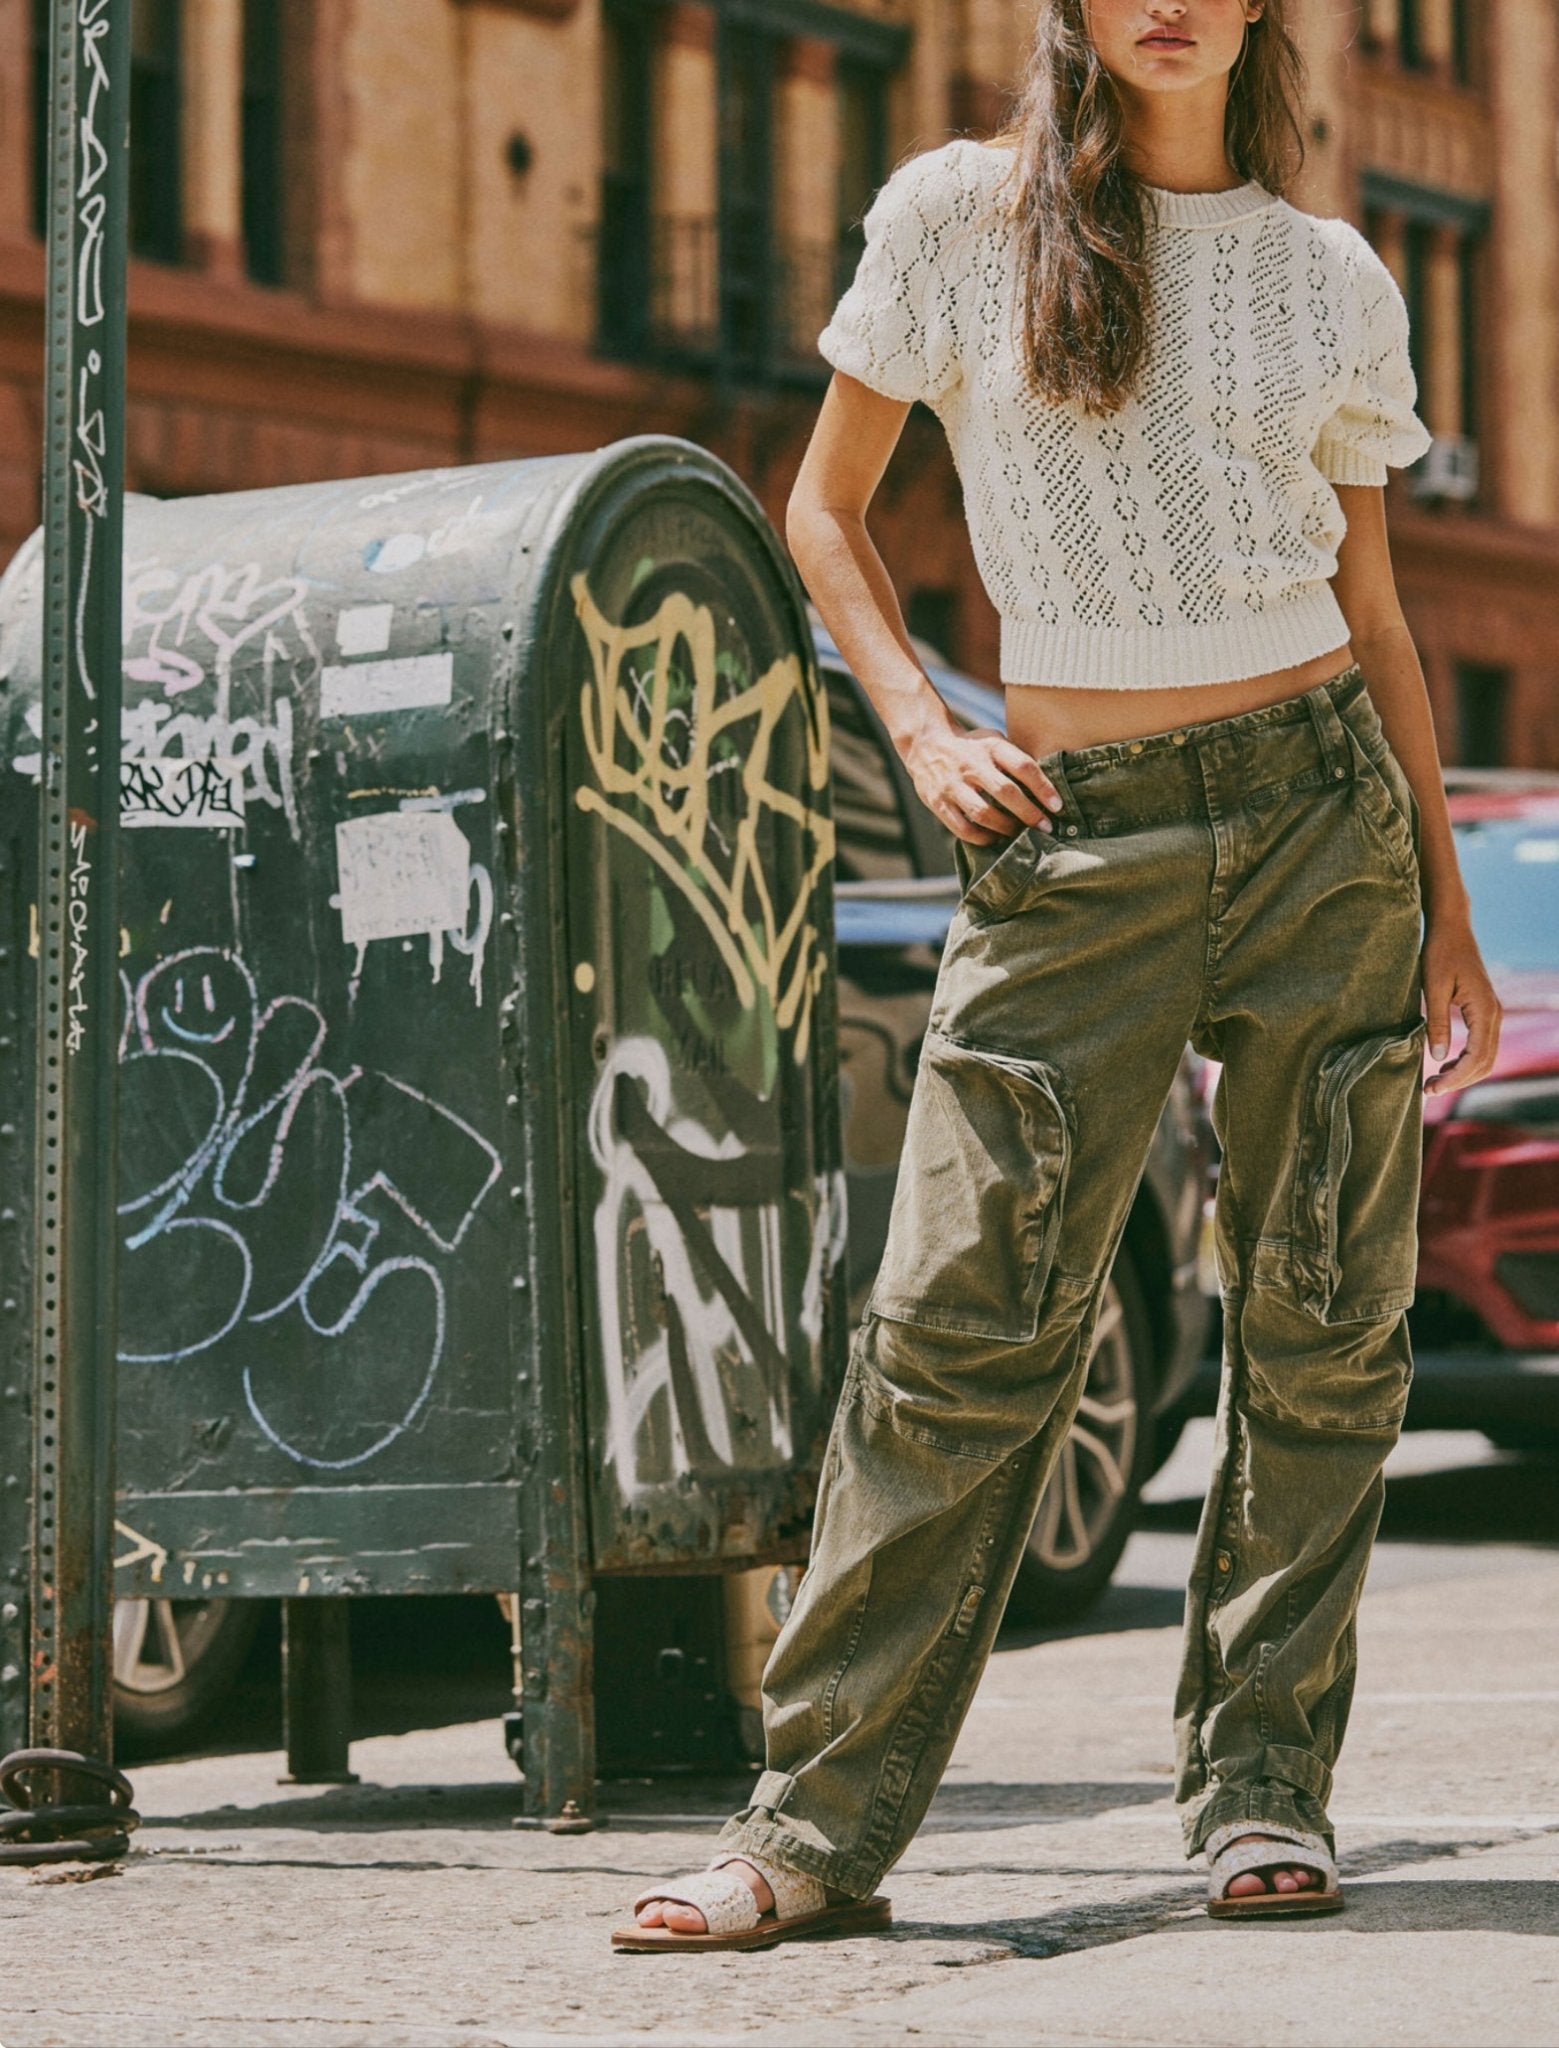 Can't Compare Slouch Pants by Free People - dusty olive - Blue Sky Fashions & Lingerie